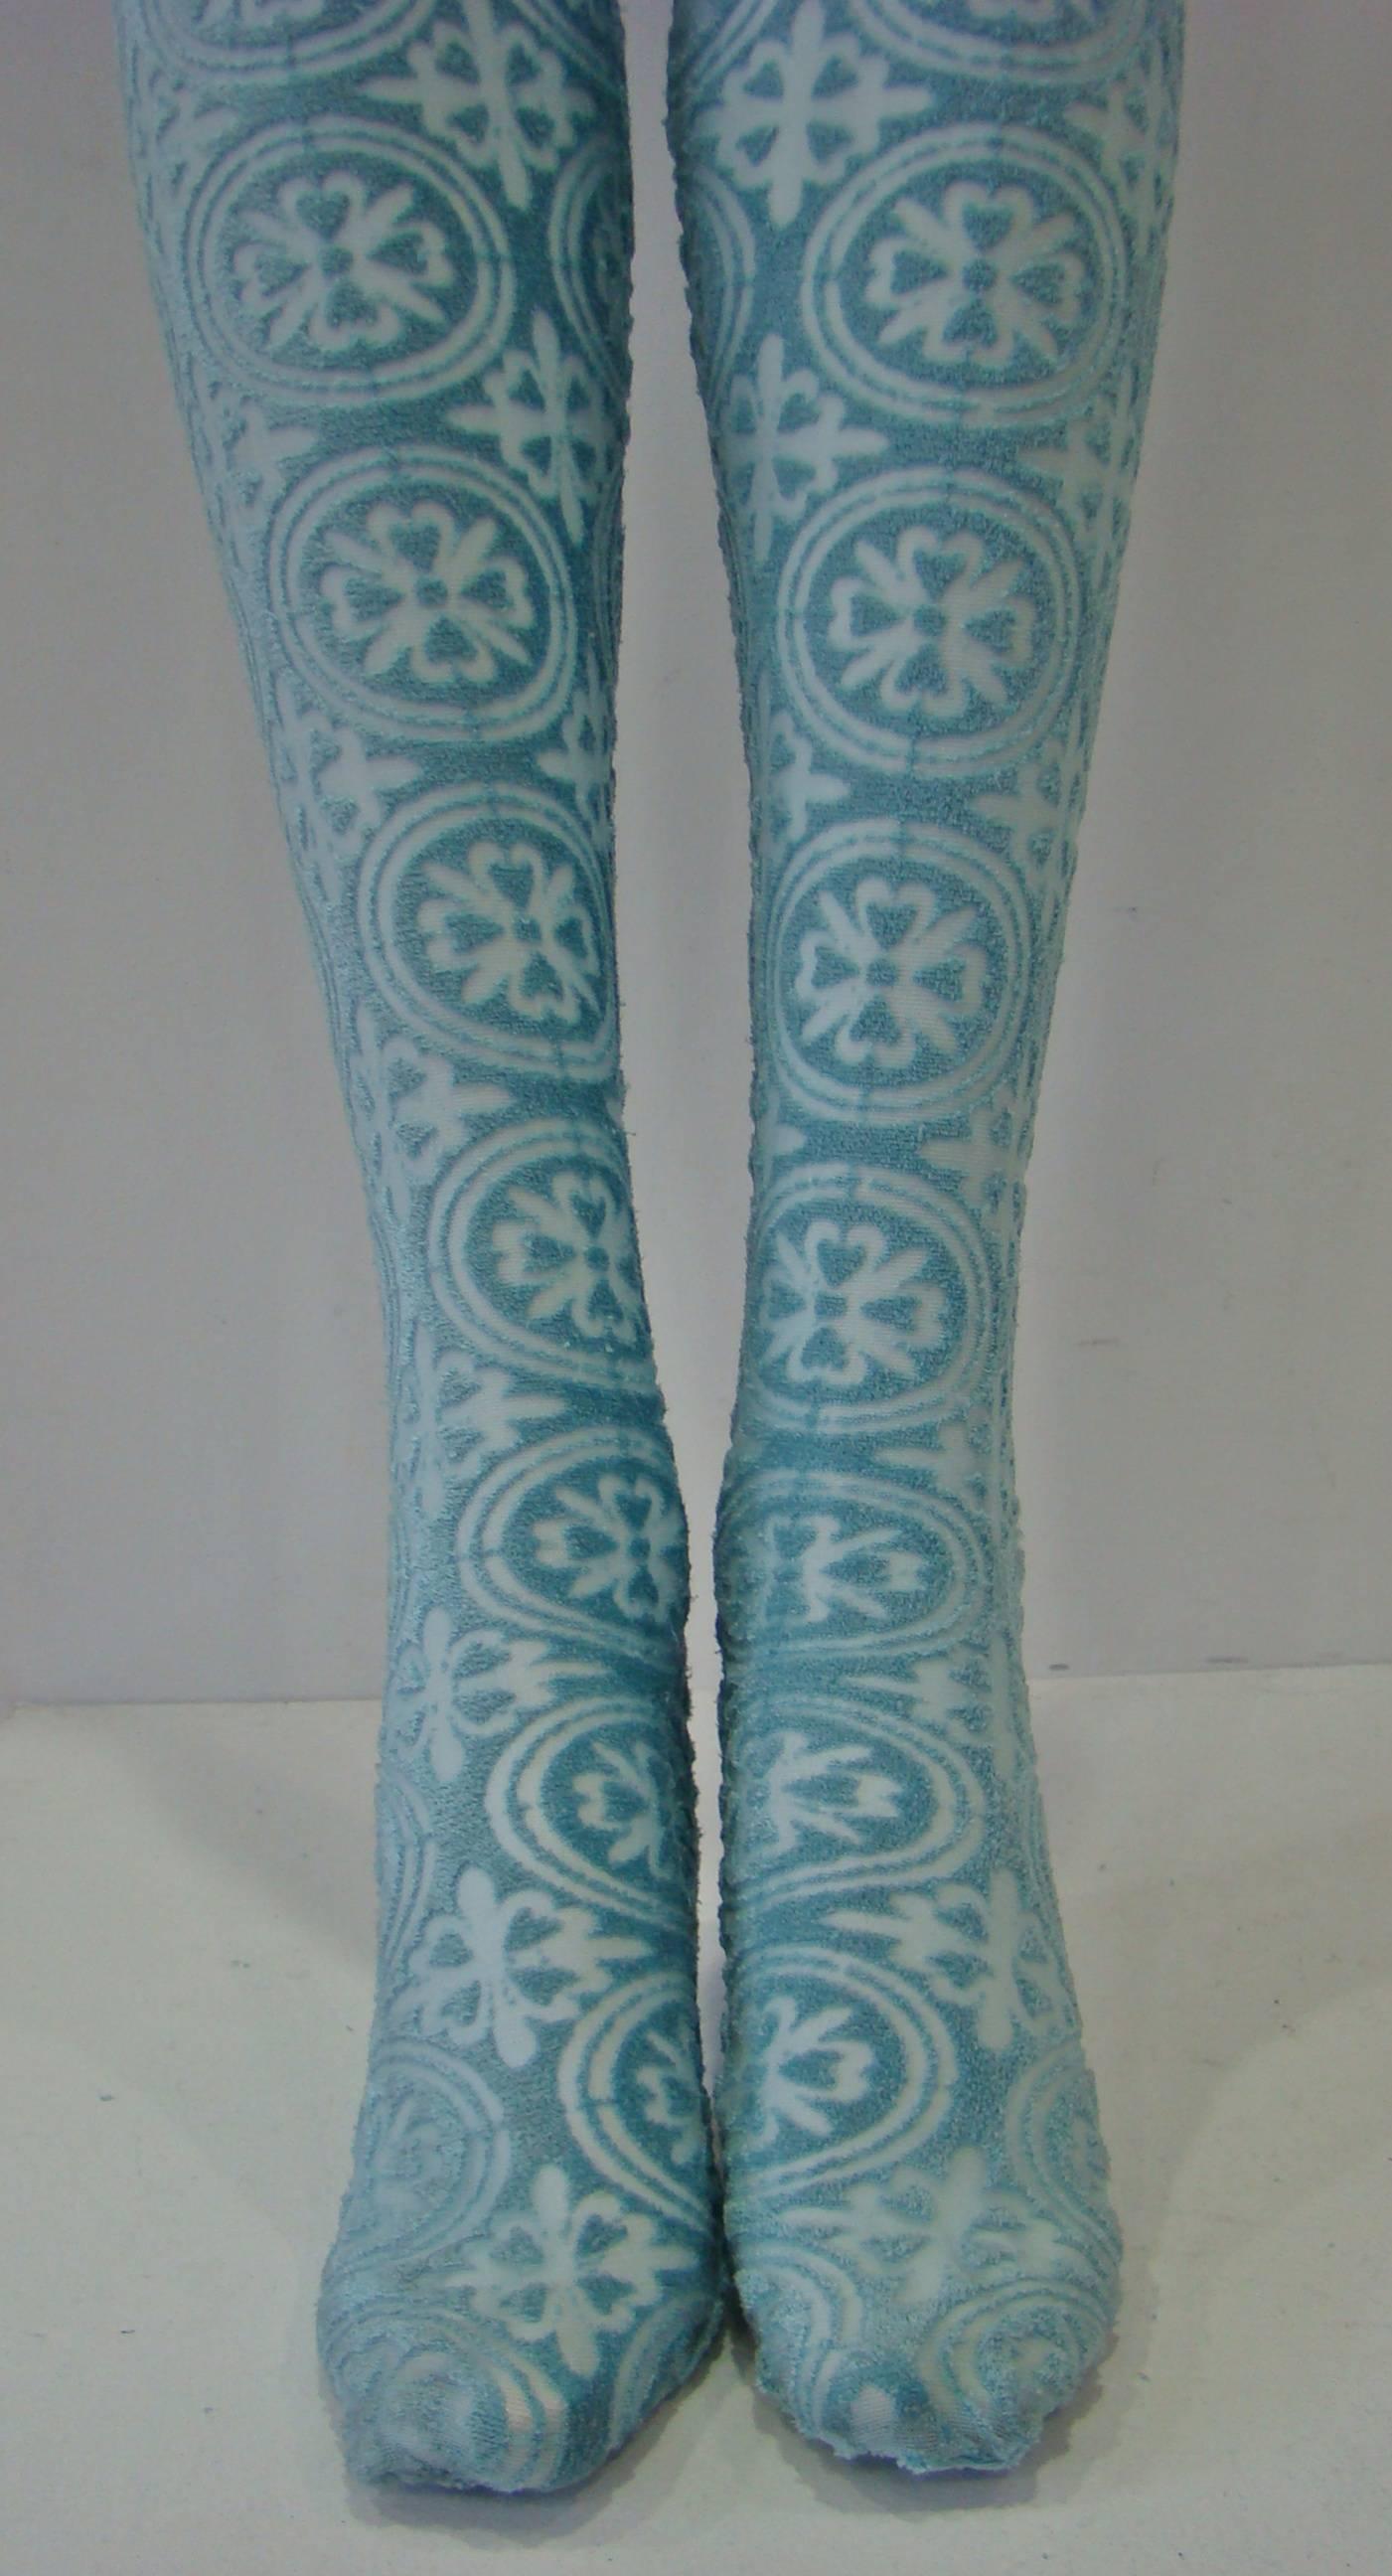 Gianni Versace Istante Coup De Velours Leggings In Excellent Condition For Sale In Athens, Agia Paraskevi